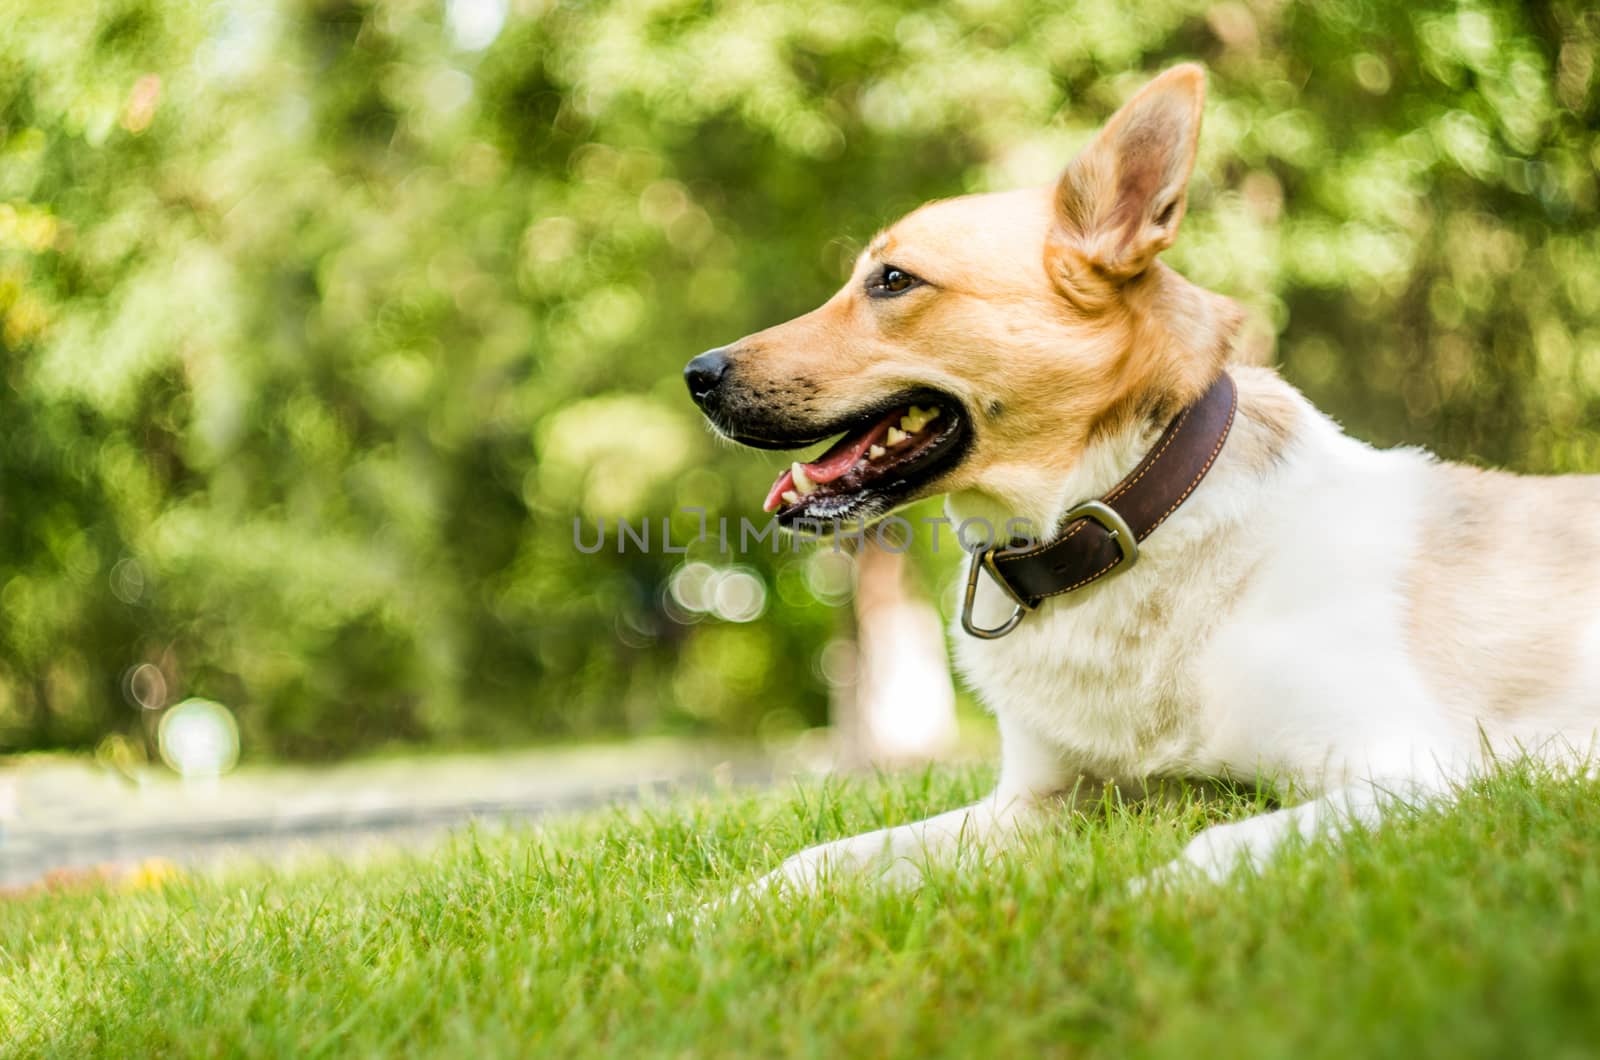 dog in the park on green grass by Desperada